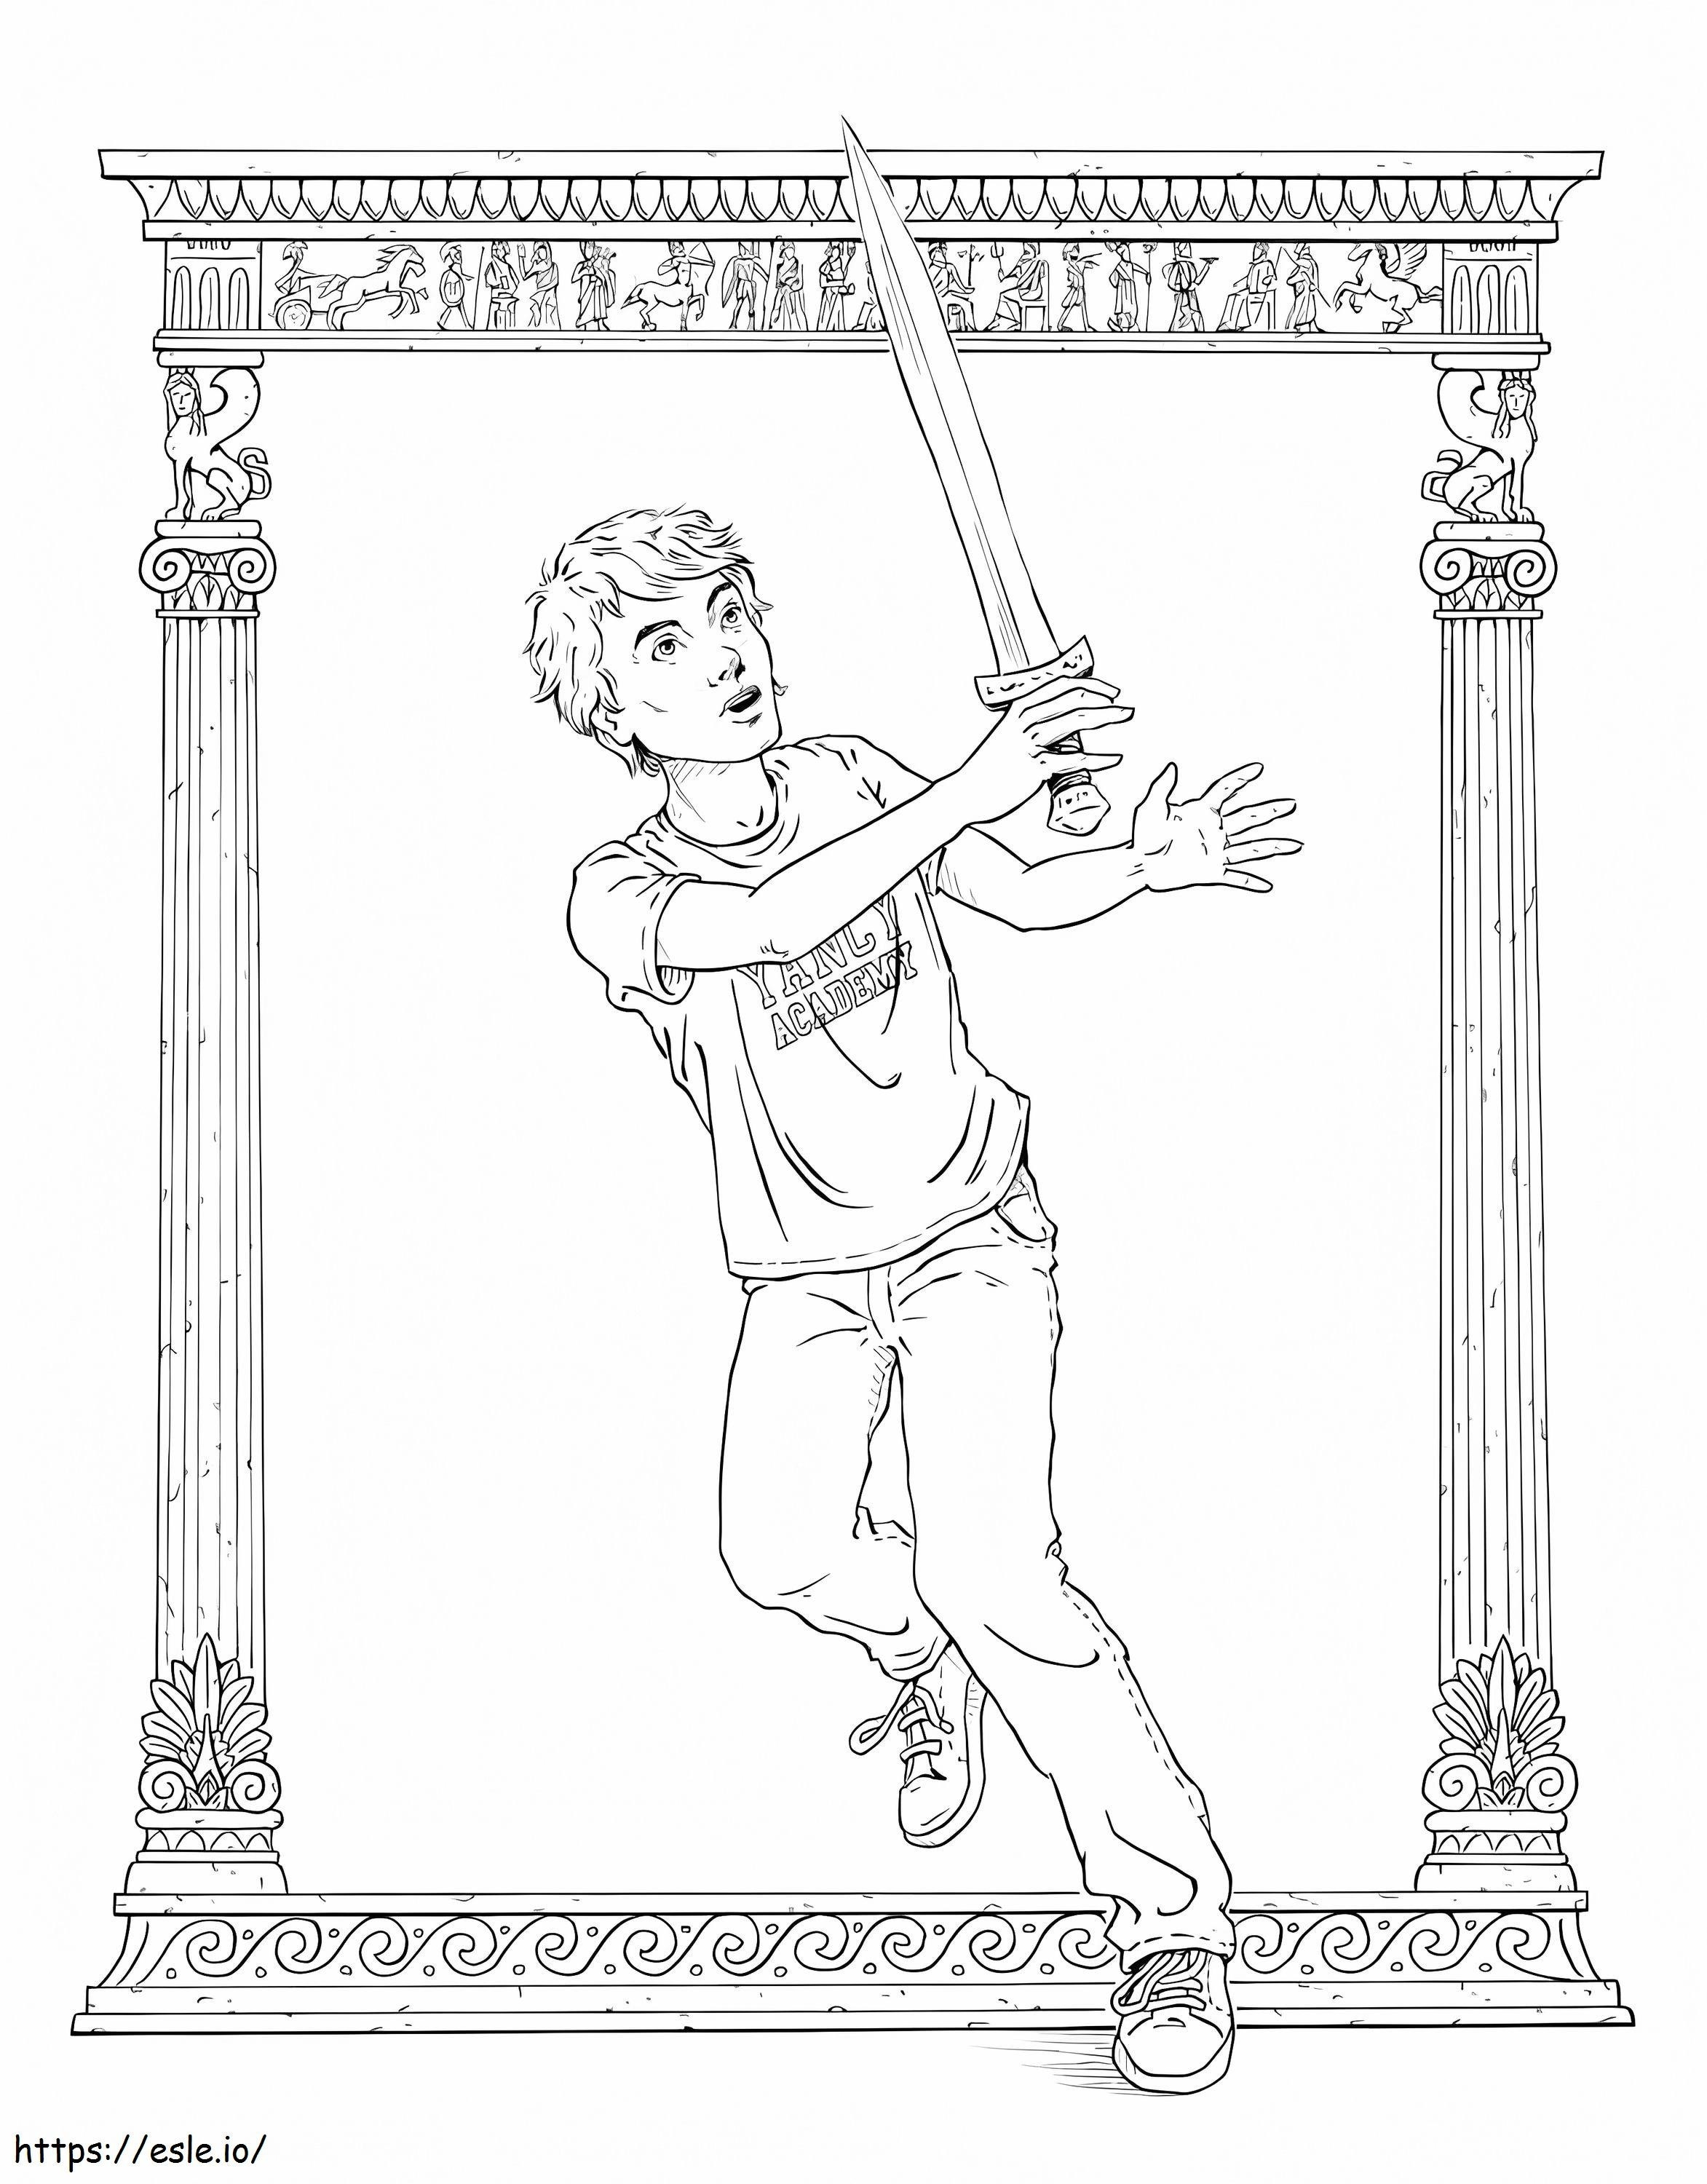 Percy Jackson 2 coloring page